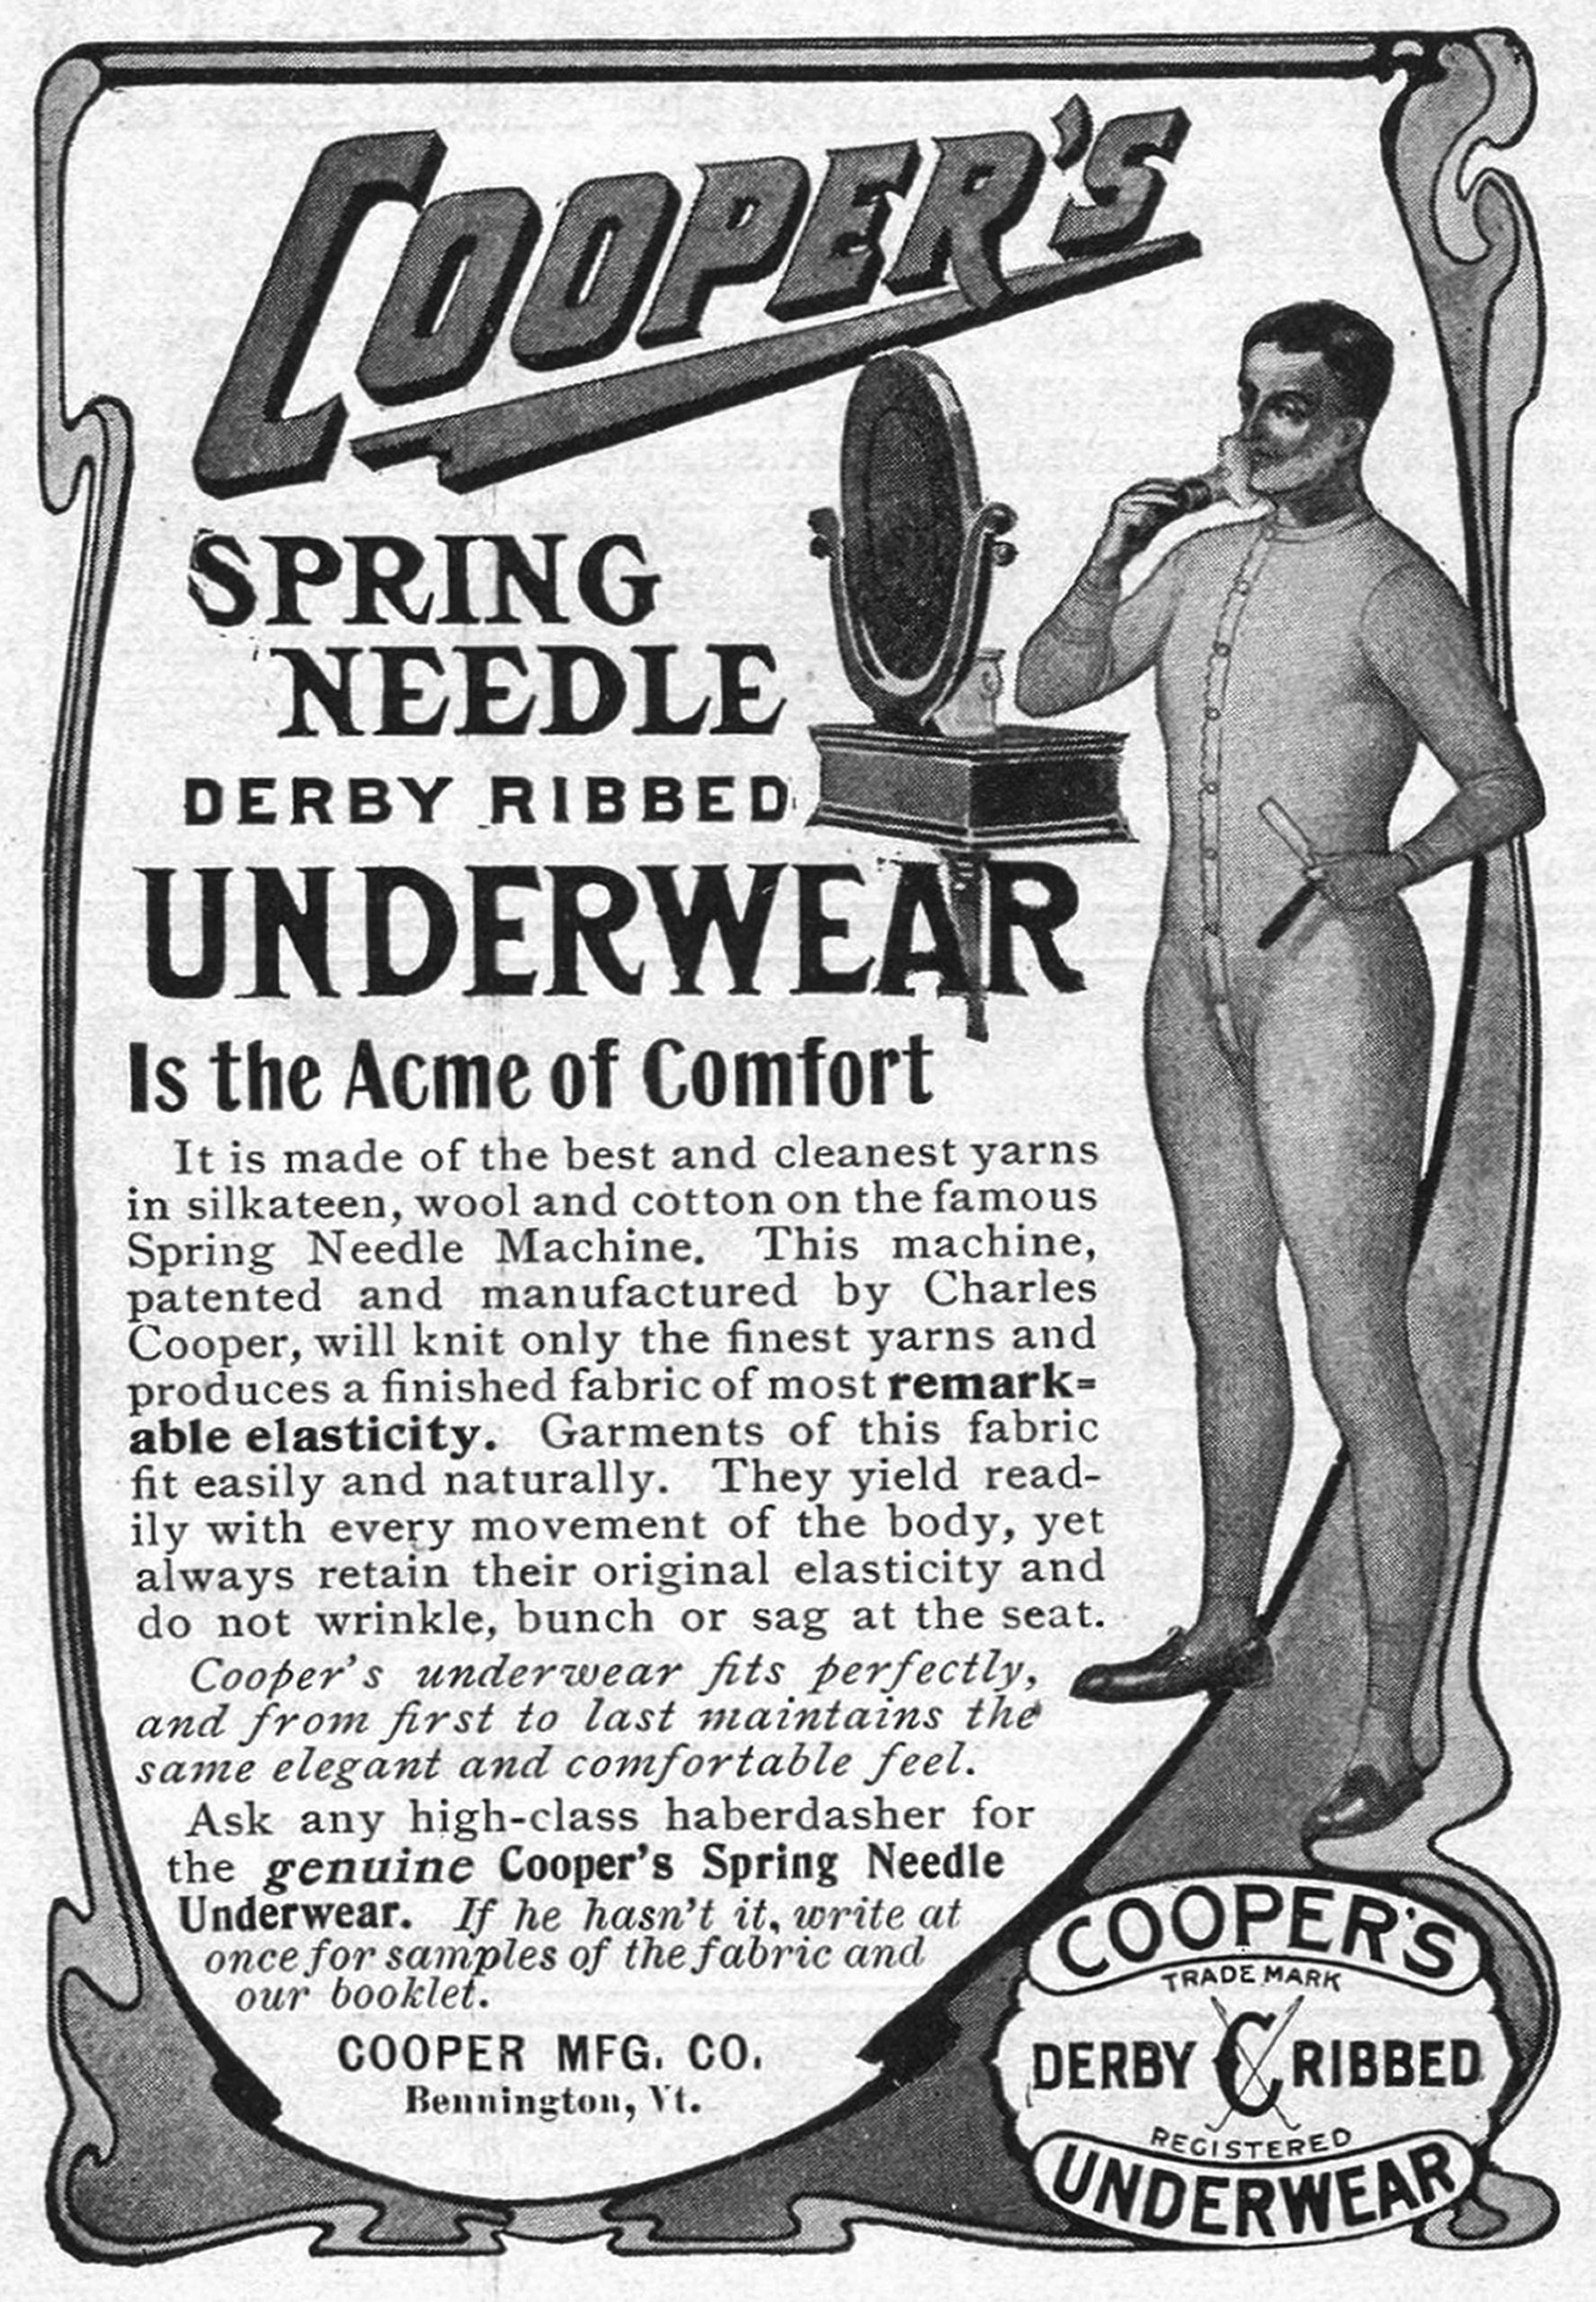 Advertisement for Cooper's spring needle derby ribbed underwear by the Cooper Manufacturing Company in Bennington, Vermont, 1905.